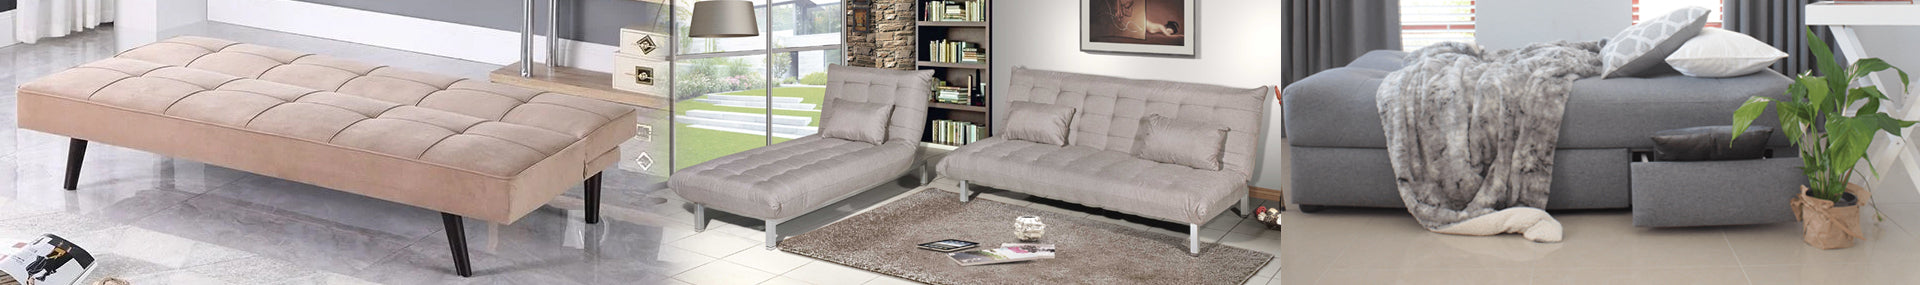 34f65824617bd64daa989314a43979b9  Sleeper Couches For Sale Classy ?v=1612335055